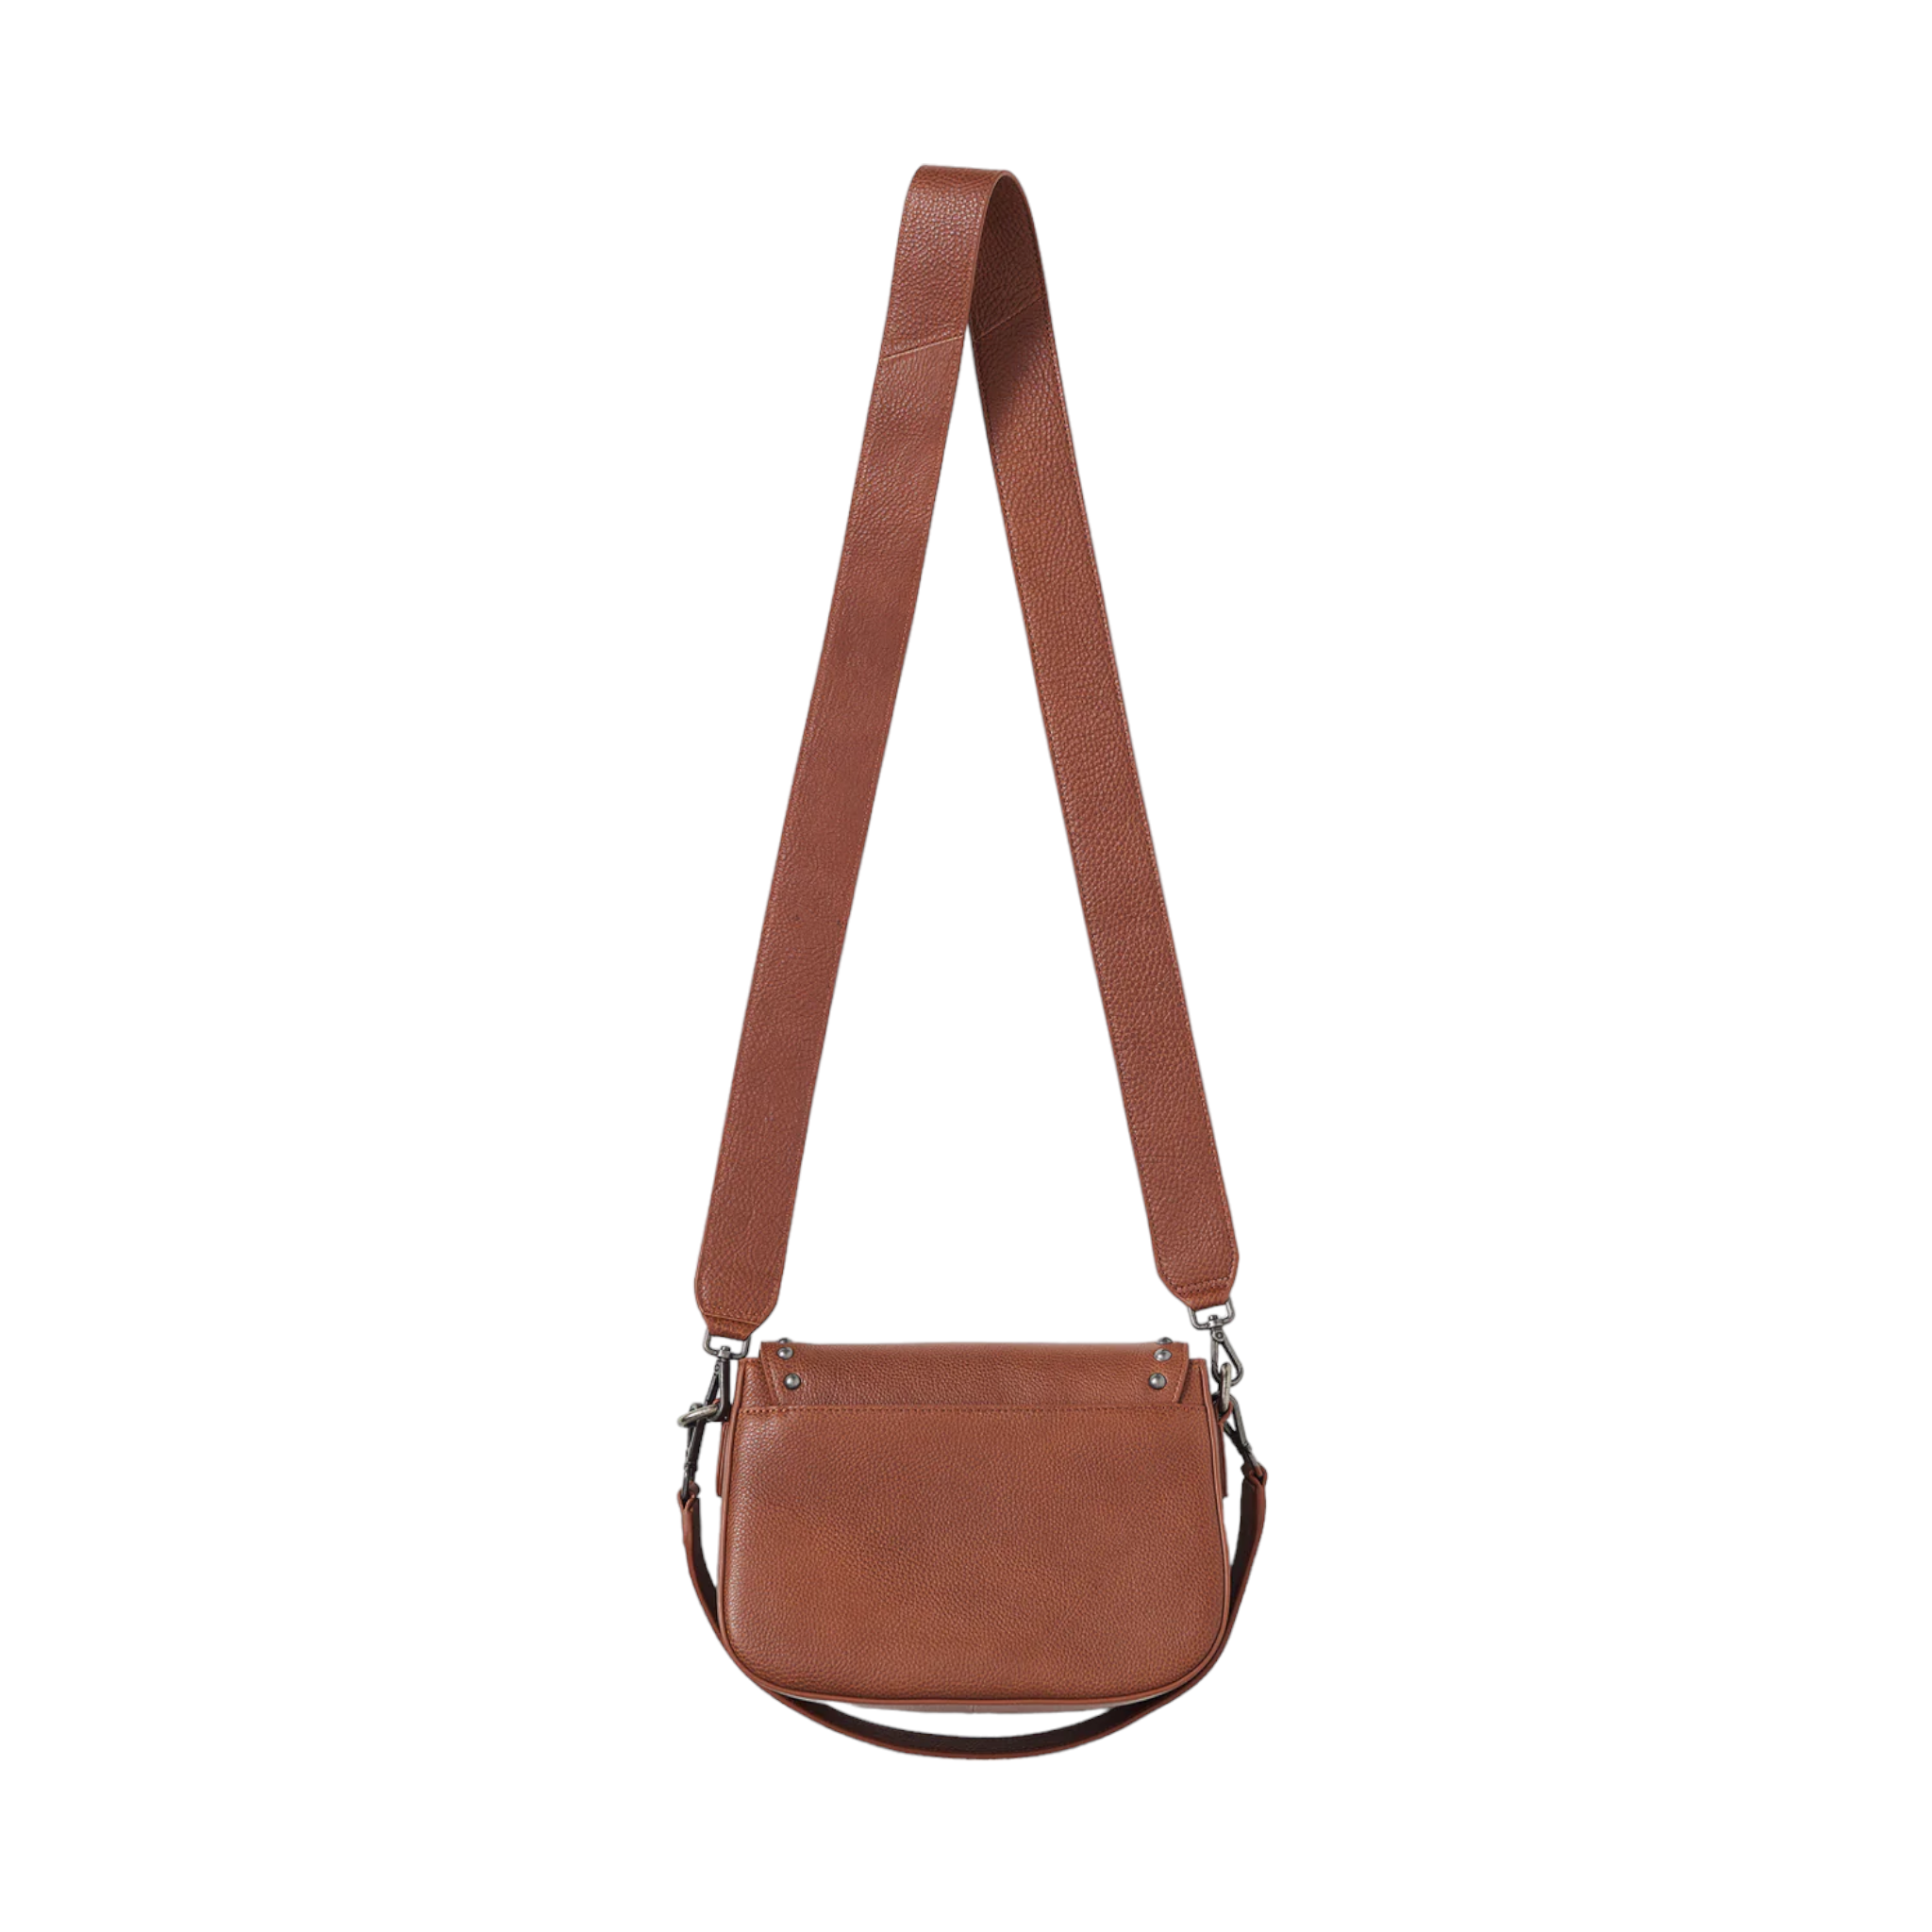 Shop Briarwood Quillie - with shoe&me - from Briarwood - Bags - Handbag, Summer, Womens - [collection]